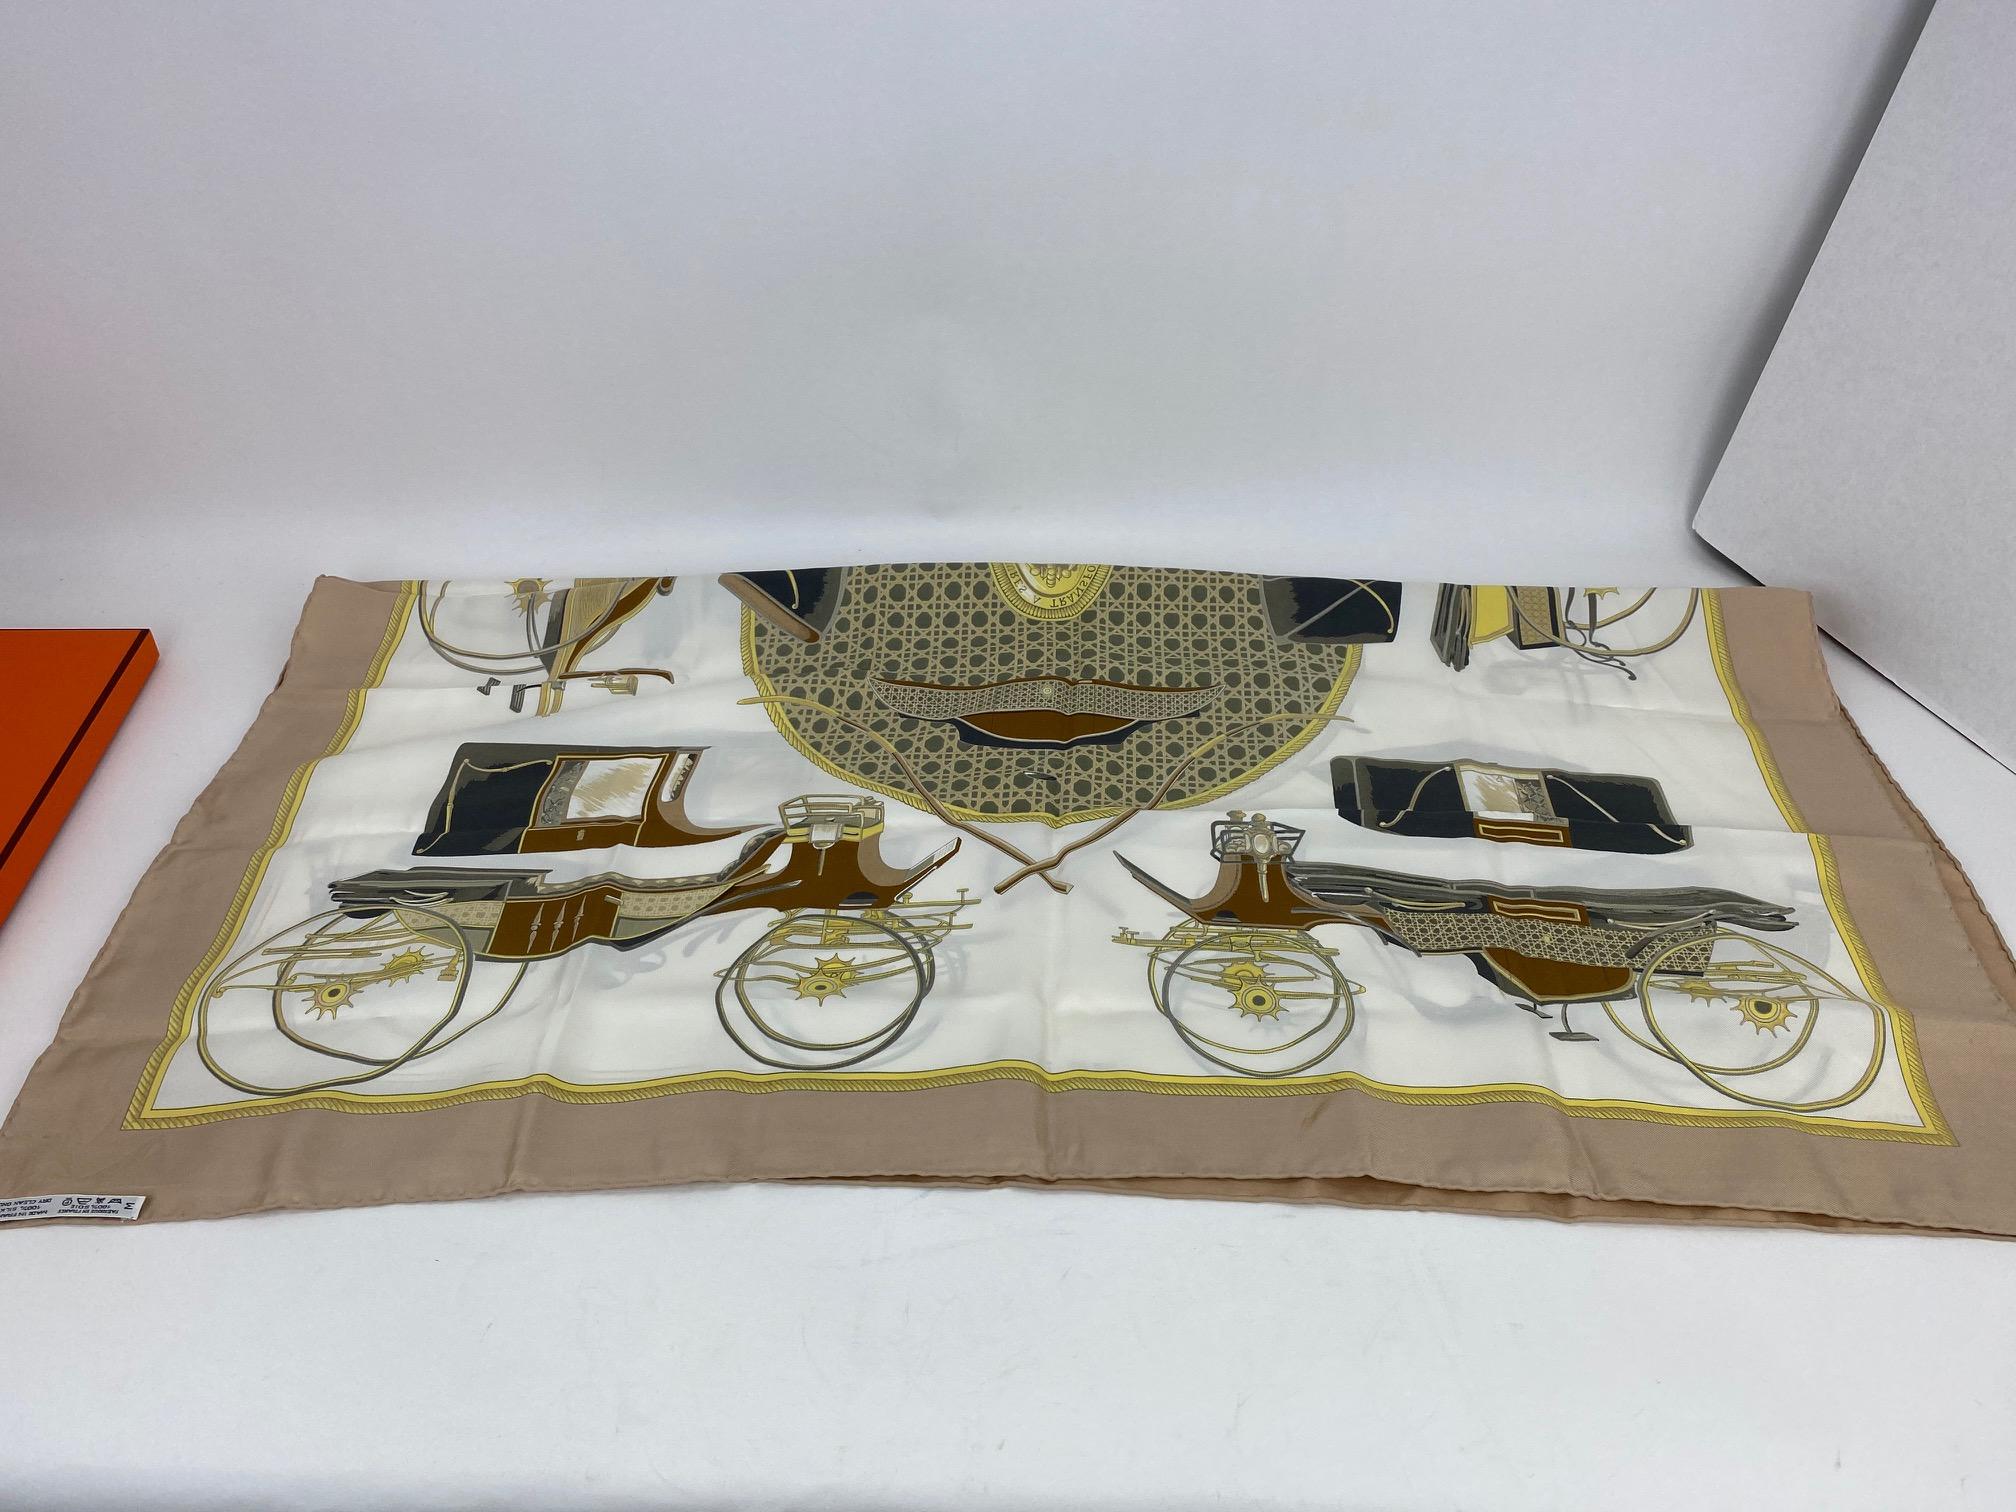 Pre-Owned 100% Authentic
Hermes Les Voitures A Transformation Silk Scarf
 RATING: B/C   good, item shows some sign of wear
MATERIAL: 100% silk
COLOR: tan, brown, olive green, yellow,
black, white 
EXTERIOR: has few minor very light marks,
on